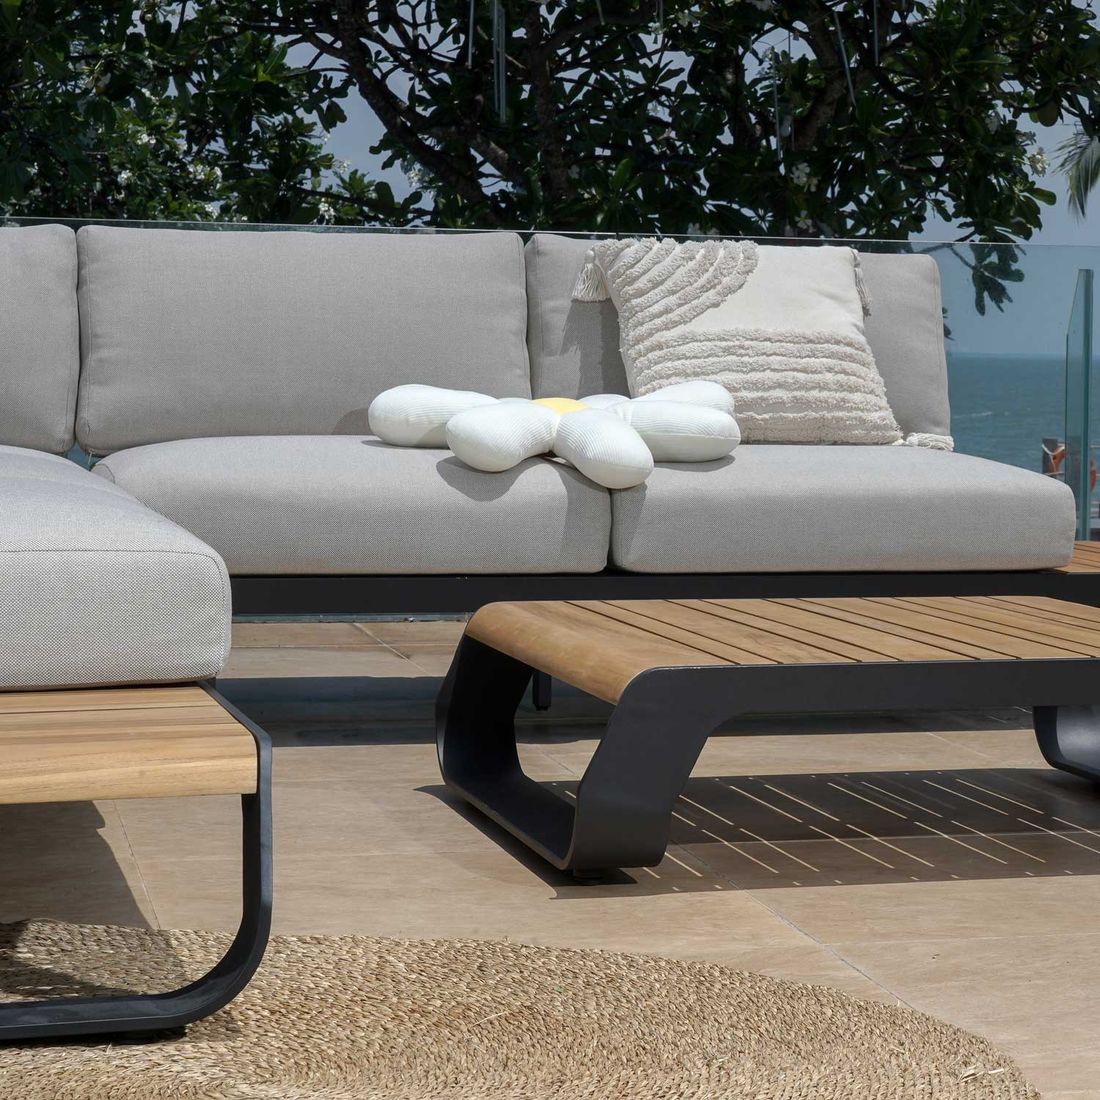 OUTLIV. Palm Springs Ecklounge Aluminium/Polyester